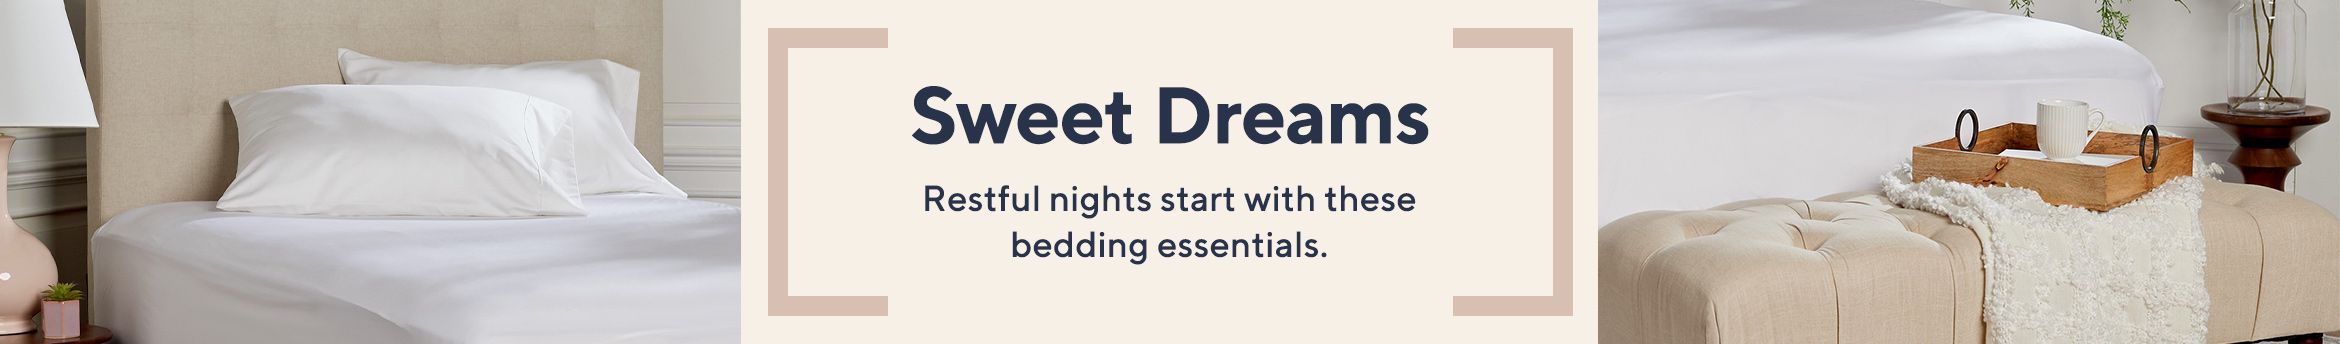 Sweet Dreams - Restful nights start with these bedding essentials. 